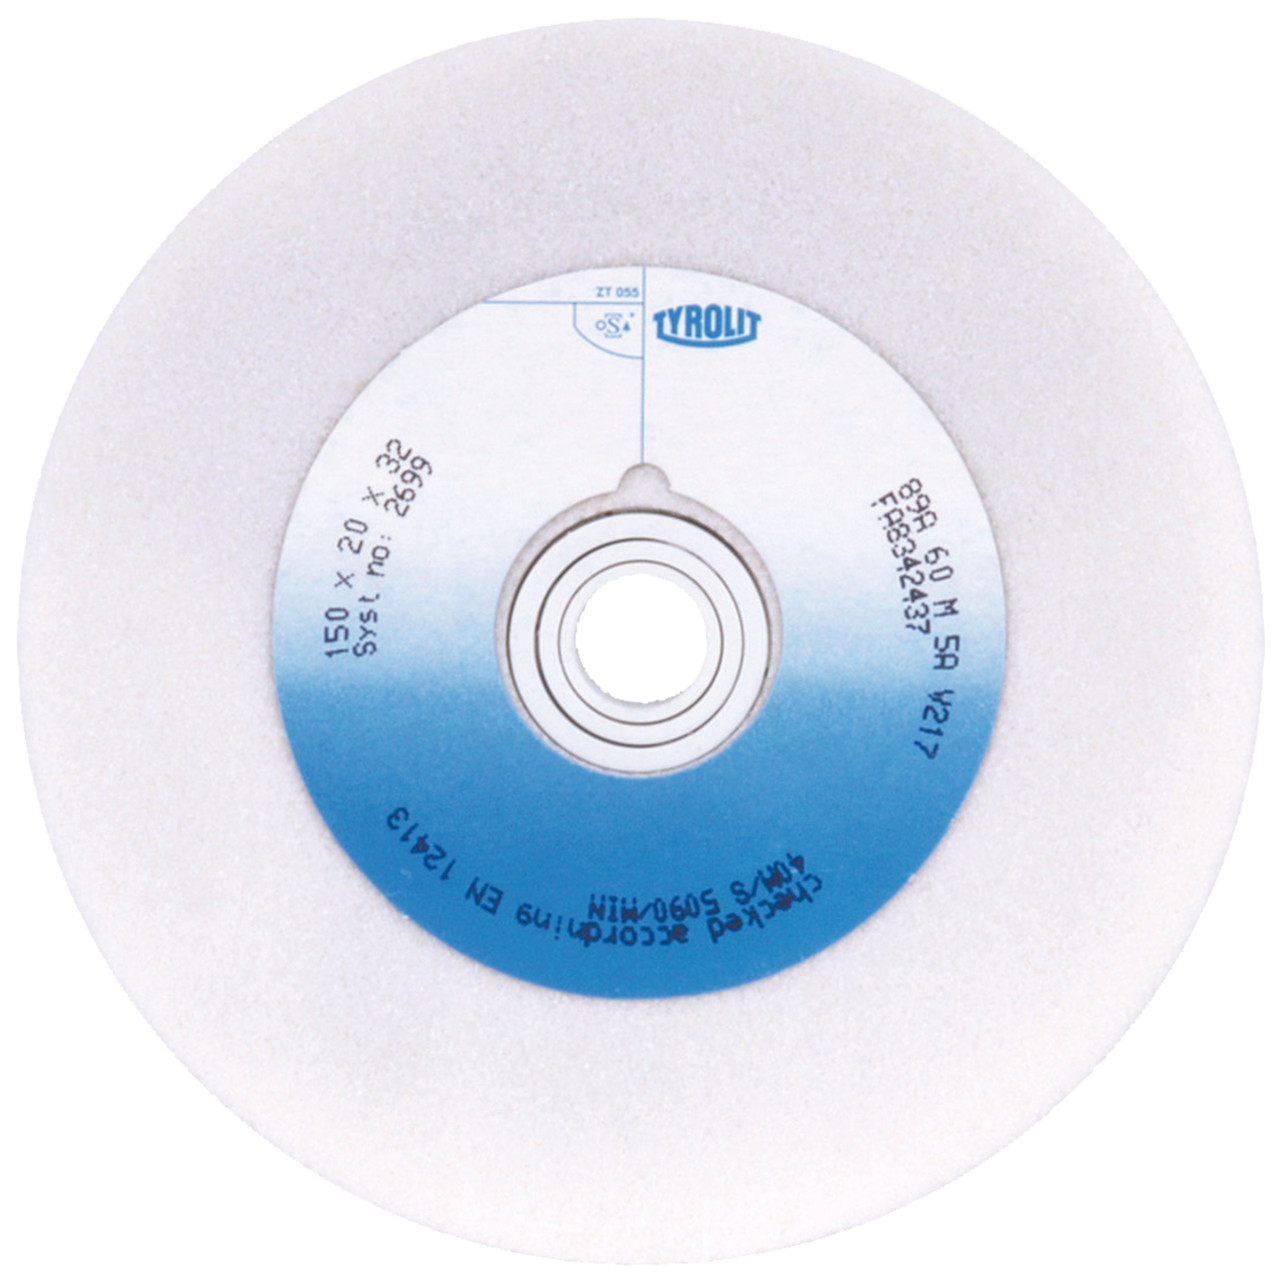 Tyrolit Conventional ceramic grinding discs DxDxH 200x25x32 For high-alloy steels and HSS, shape: 1, Art. 39540